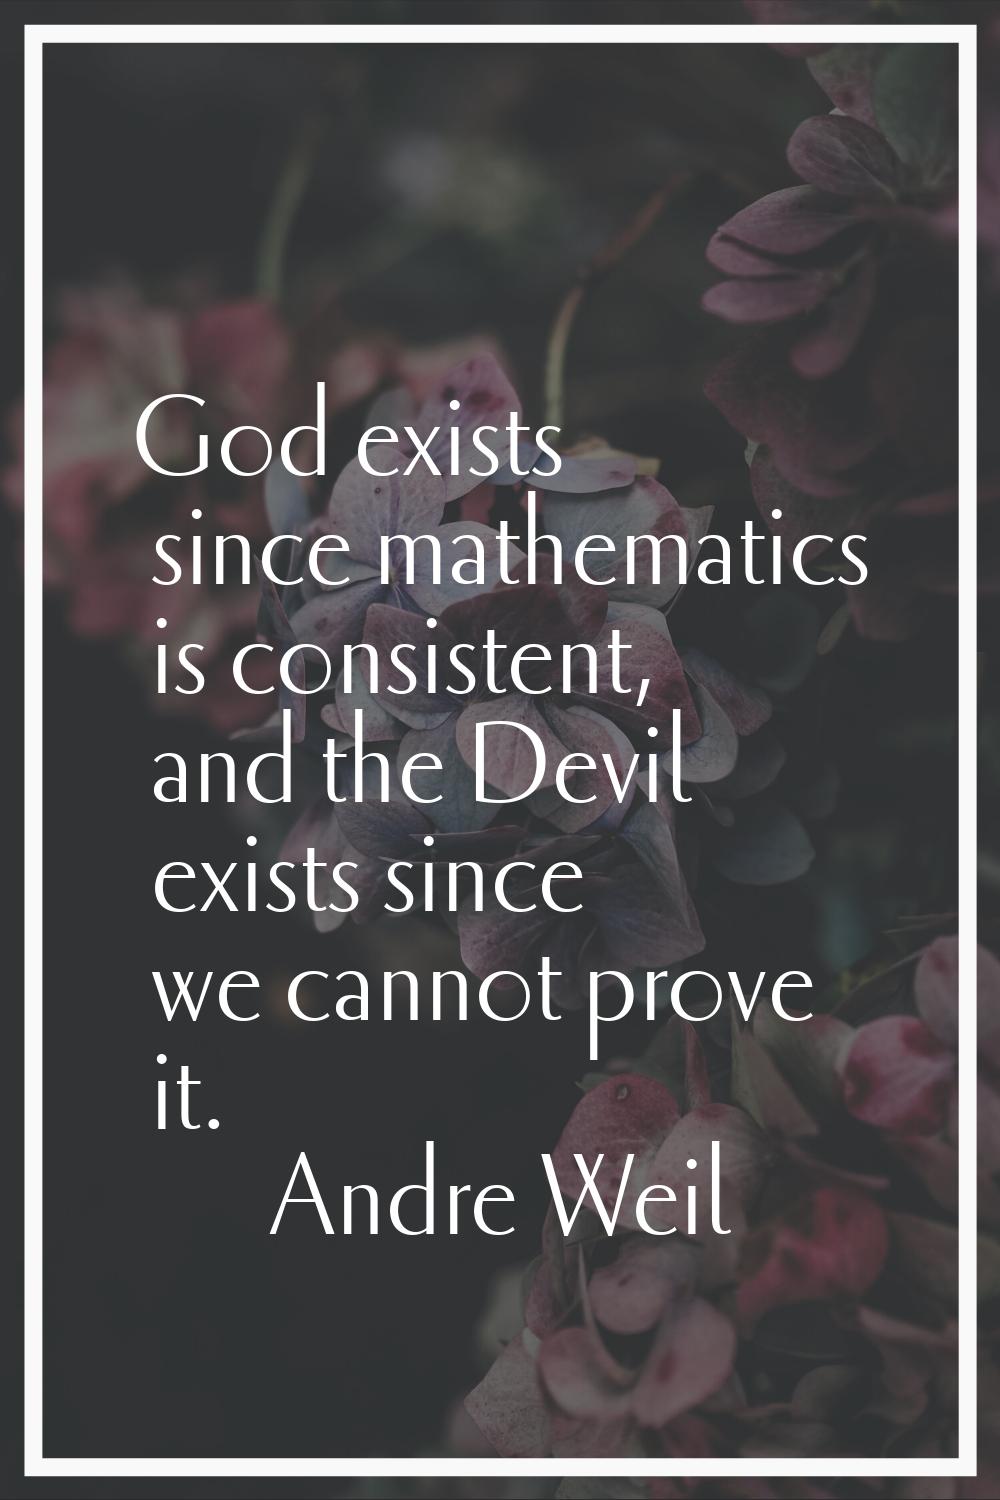 God exists since mathematics is consistent, and the Devil exists since we cannot prove it.